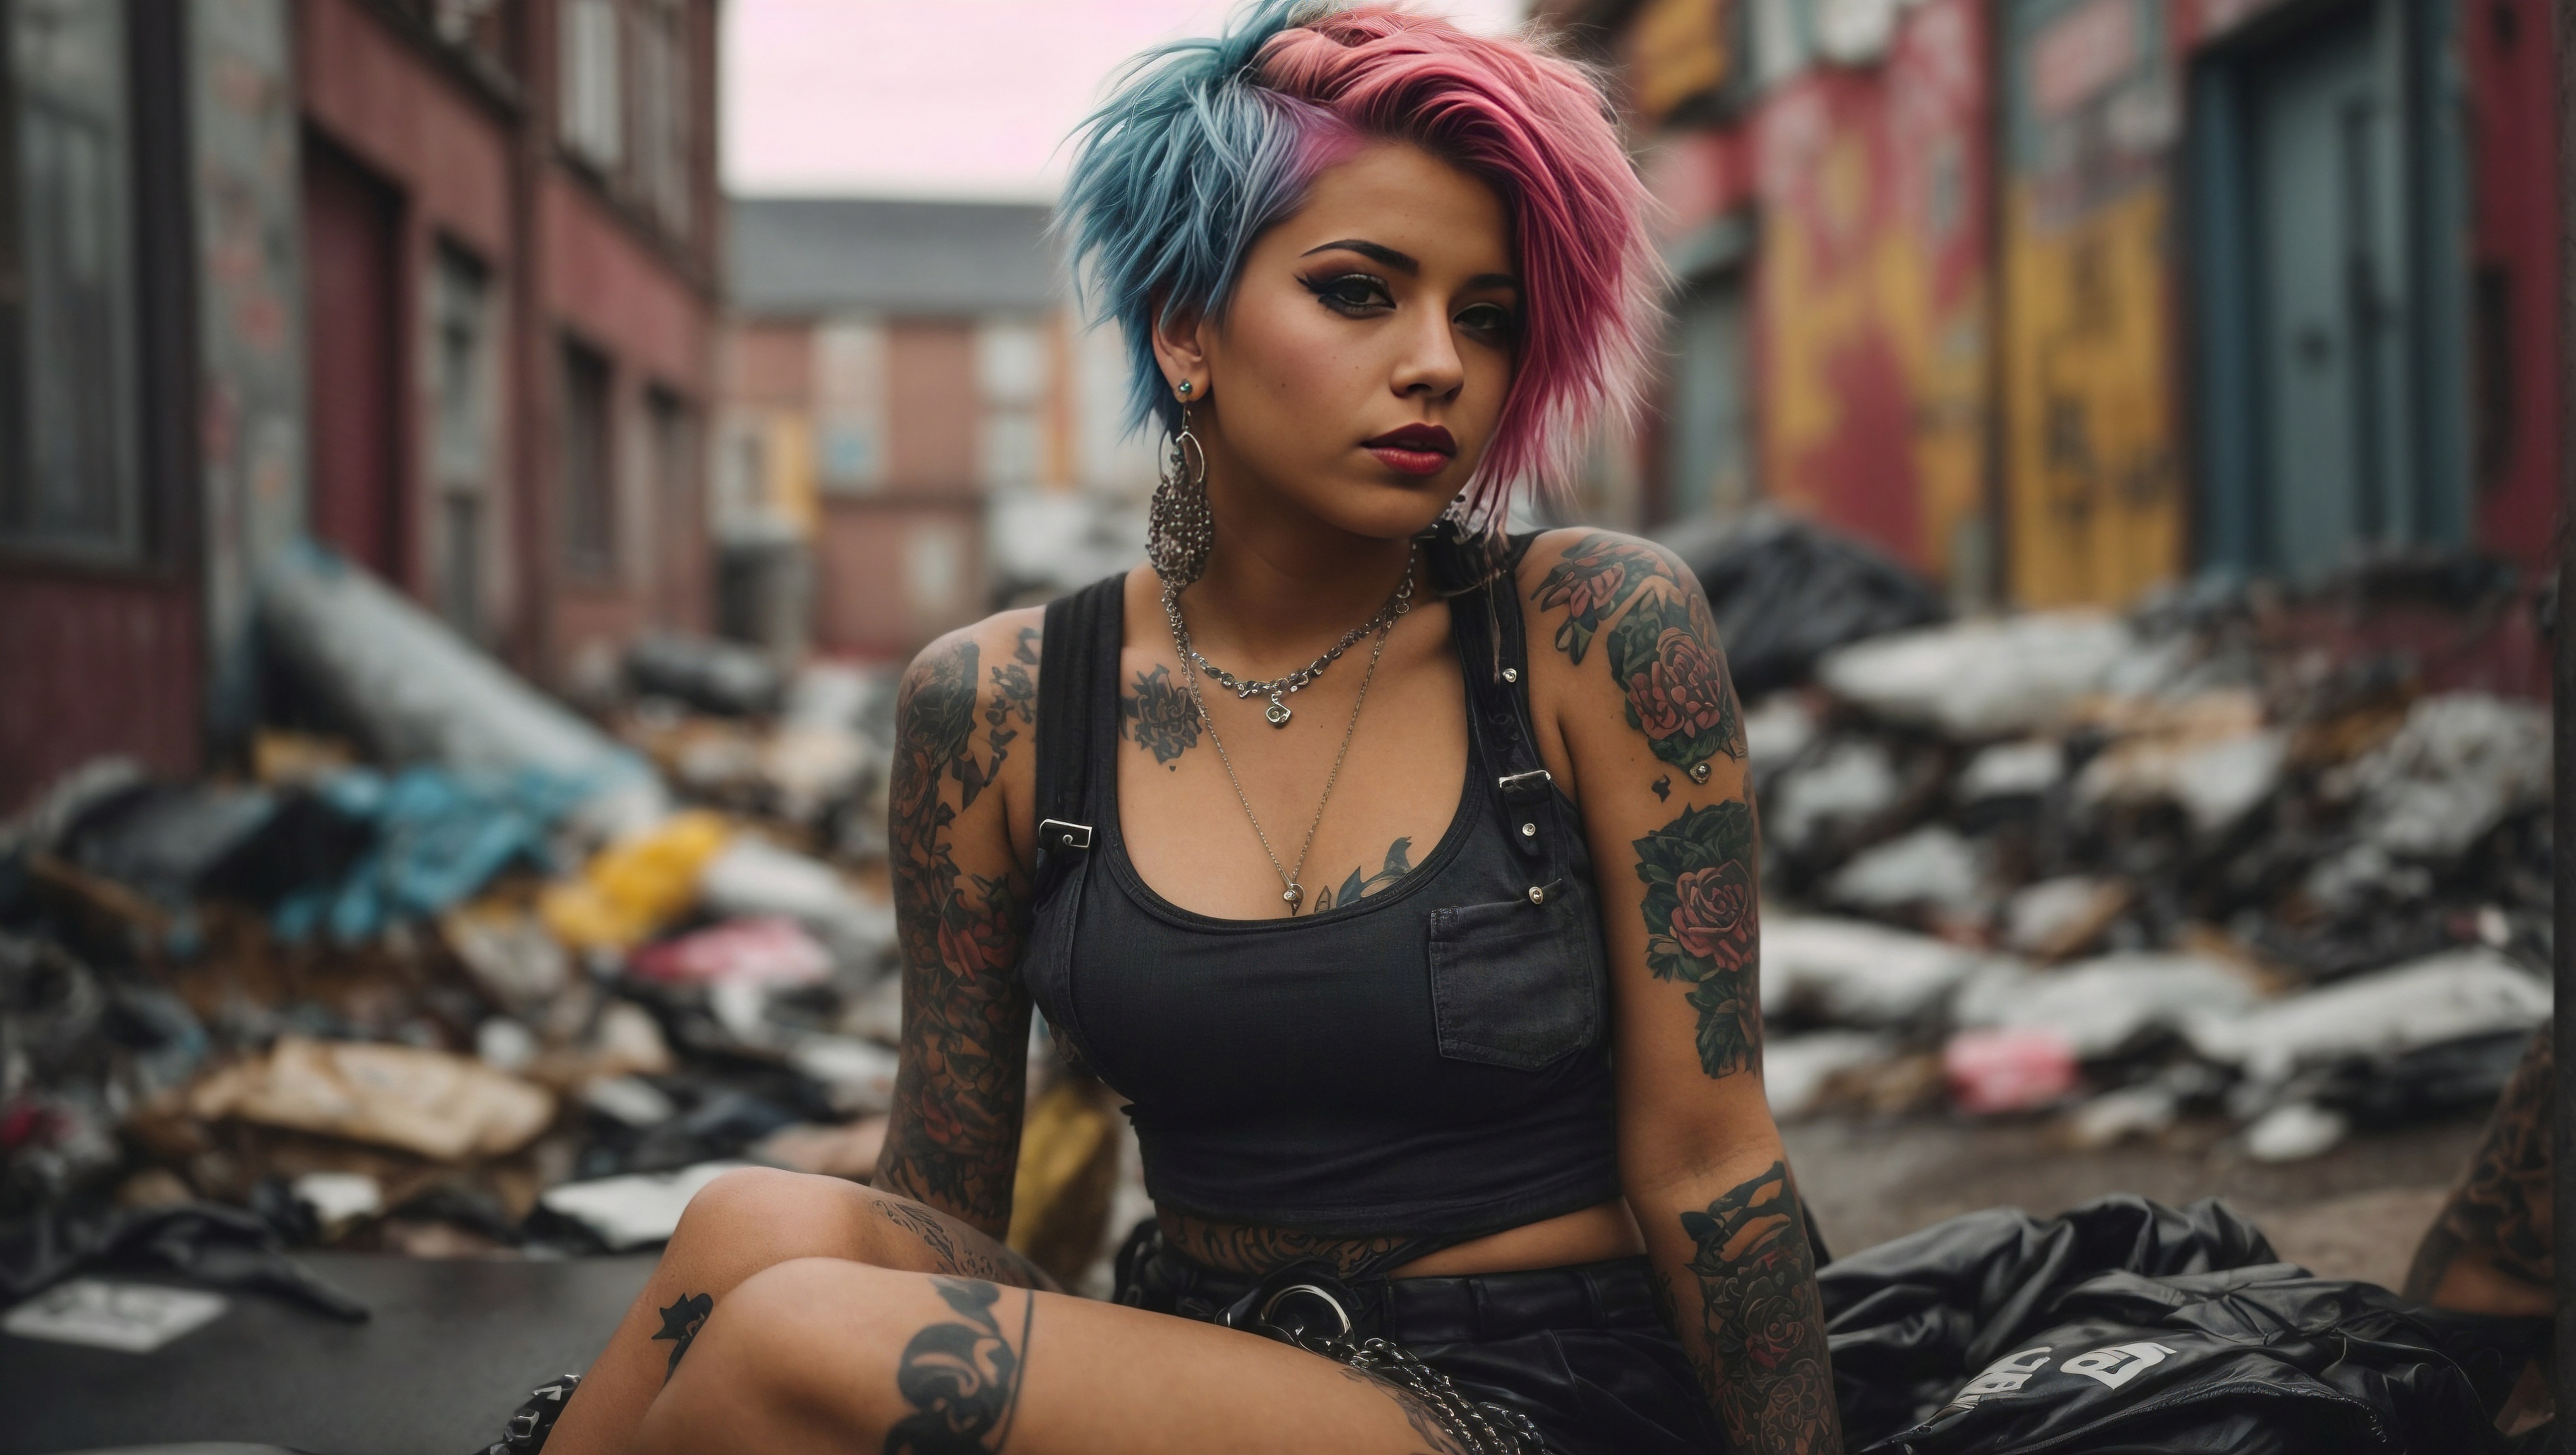 Girl with piercings poses for the camera